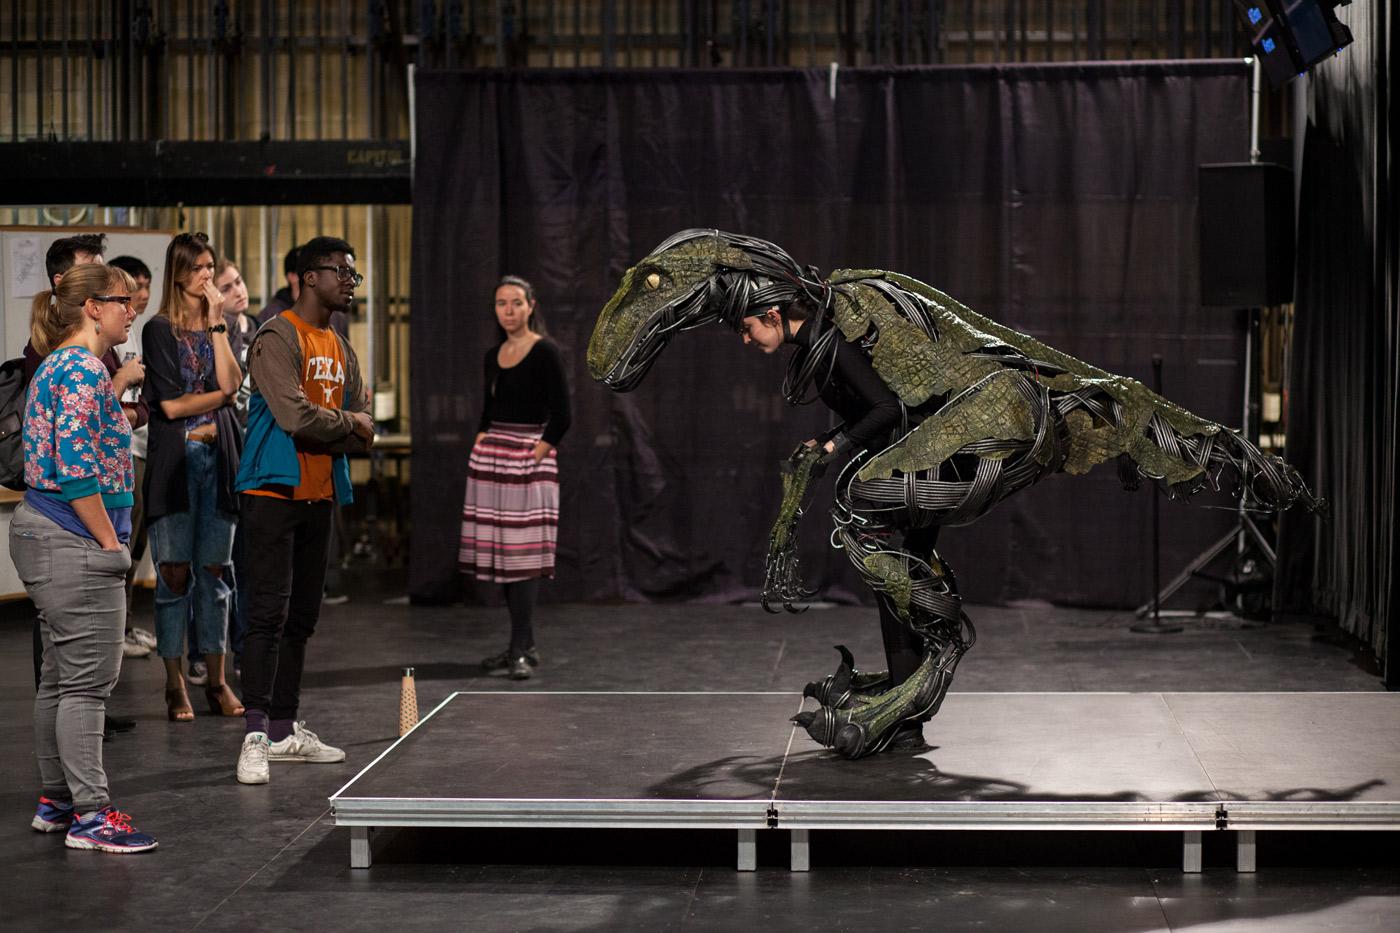 UT students examine an animatronic raptor costume worn by another student